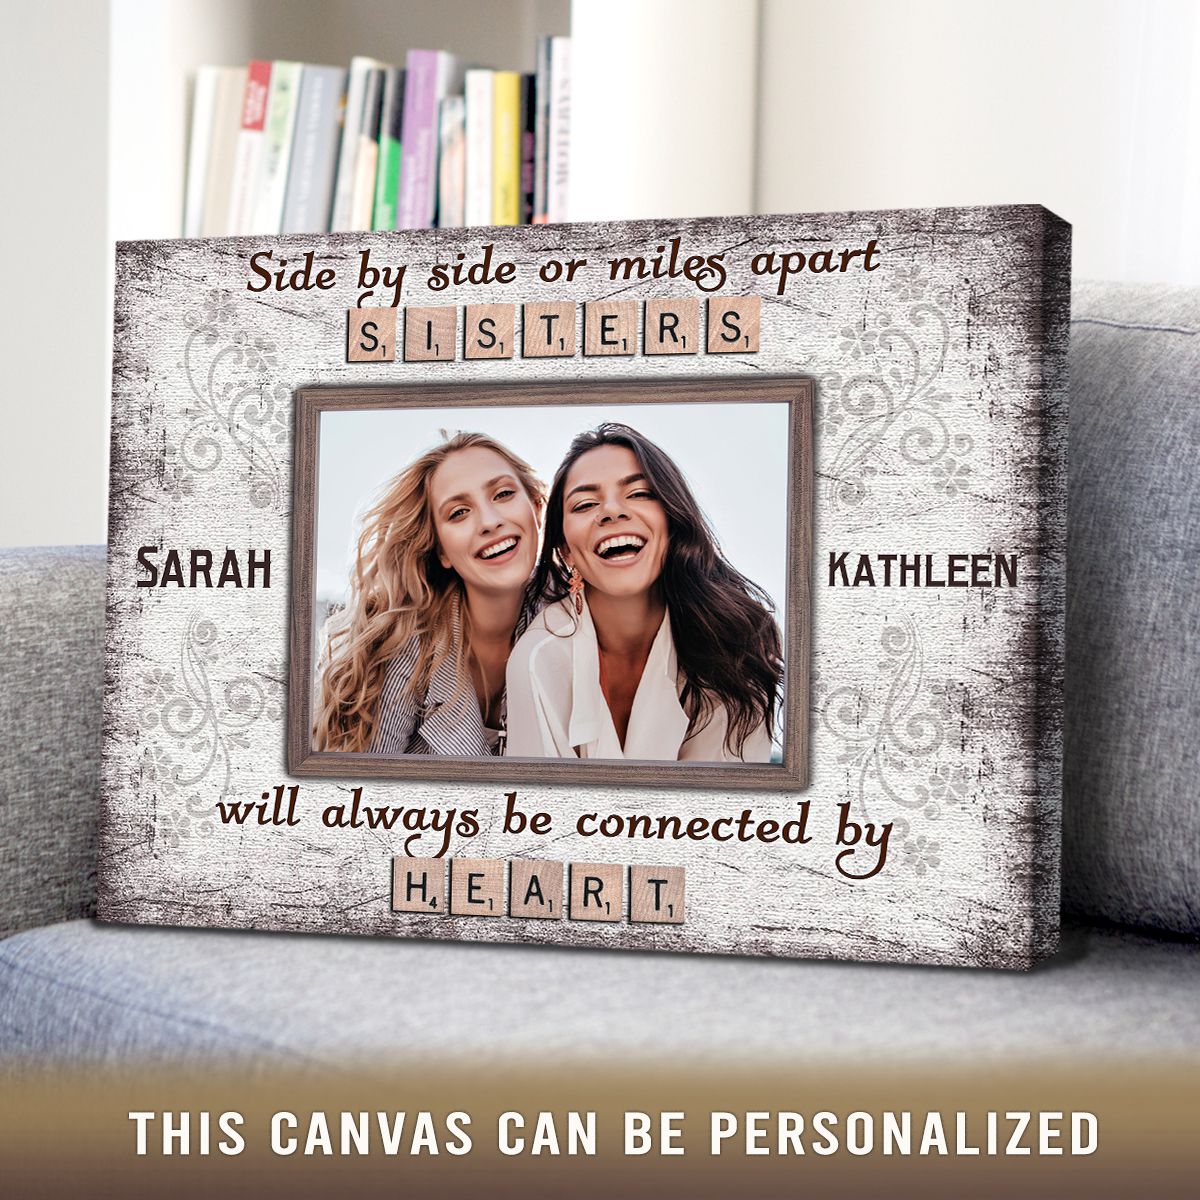 https://images.ohcanvas.com/ohcanvas_com/2022/07/07014141/unique-sister-birthday-gifts-personalized-gift-for-sister03.jpg